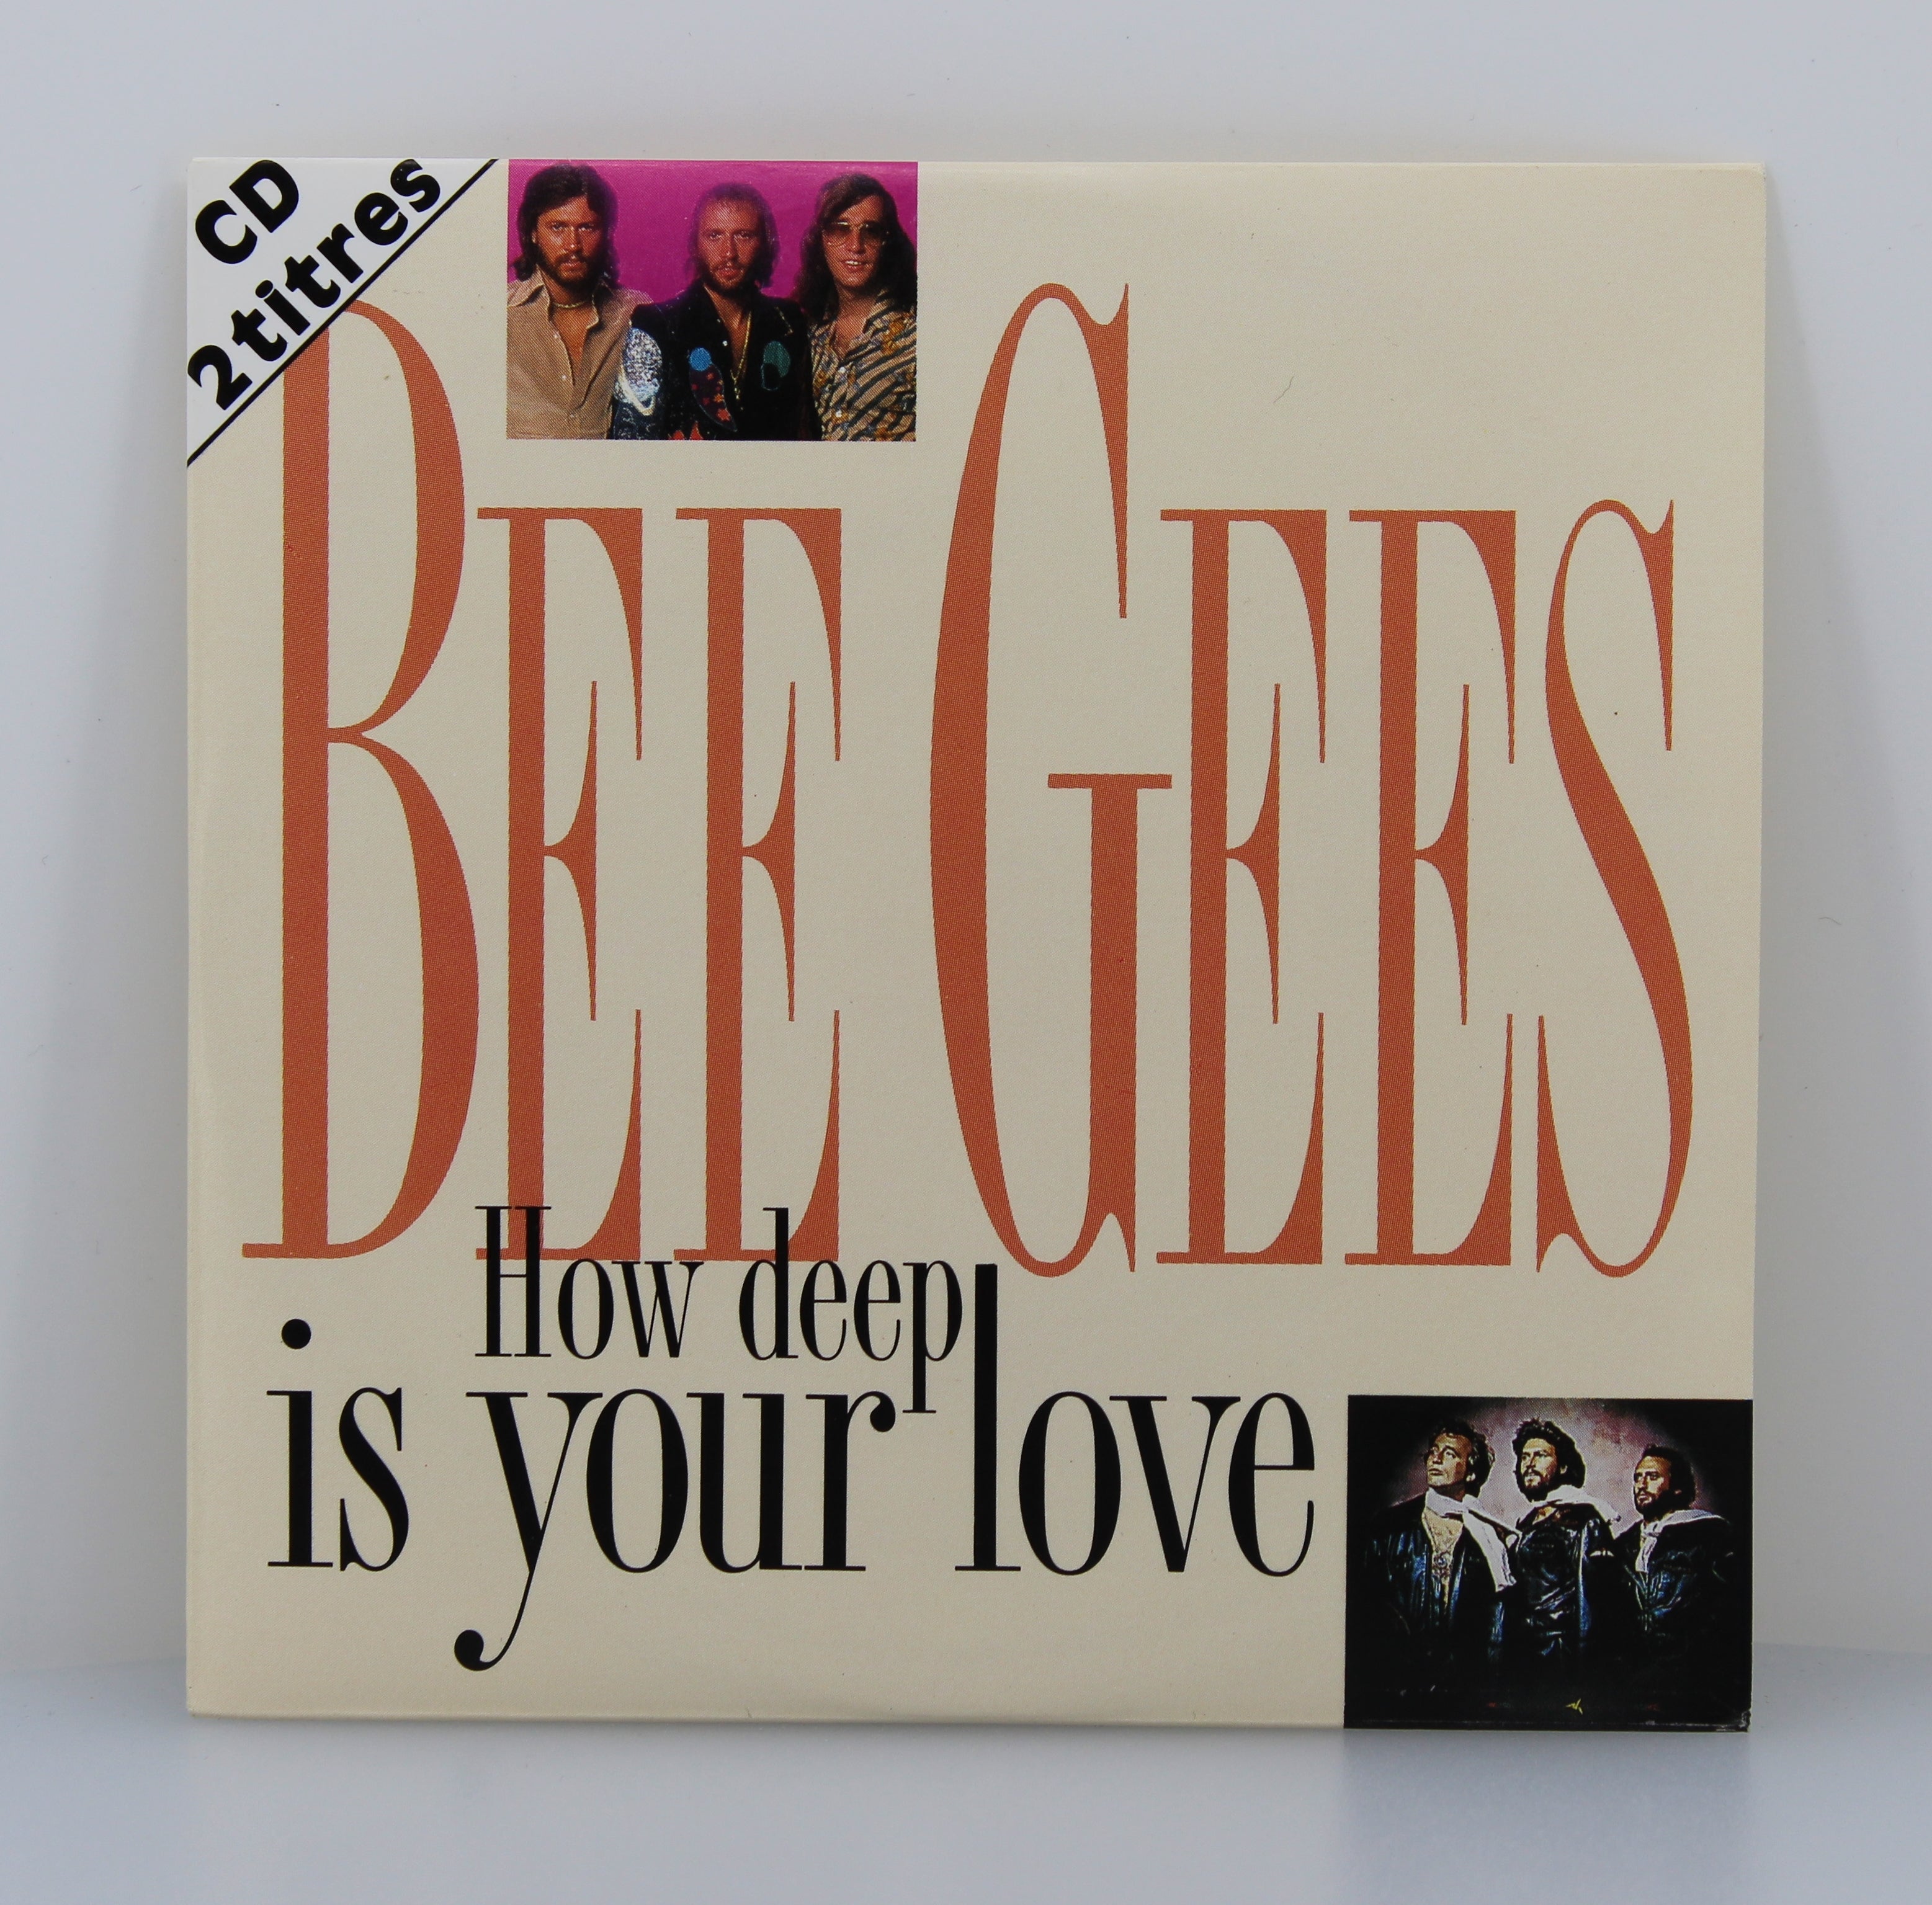 HOW DEEP IS YOUR LOVE - Bee Gees (aula completa)